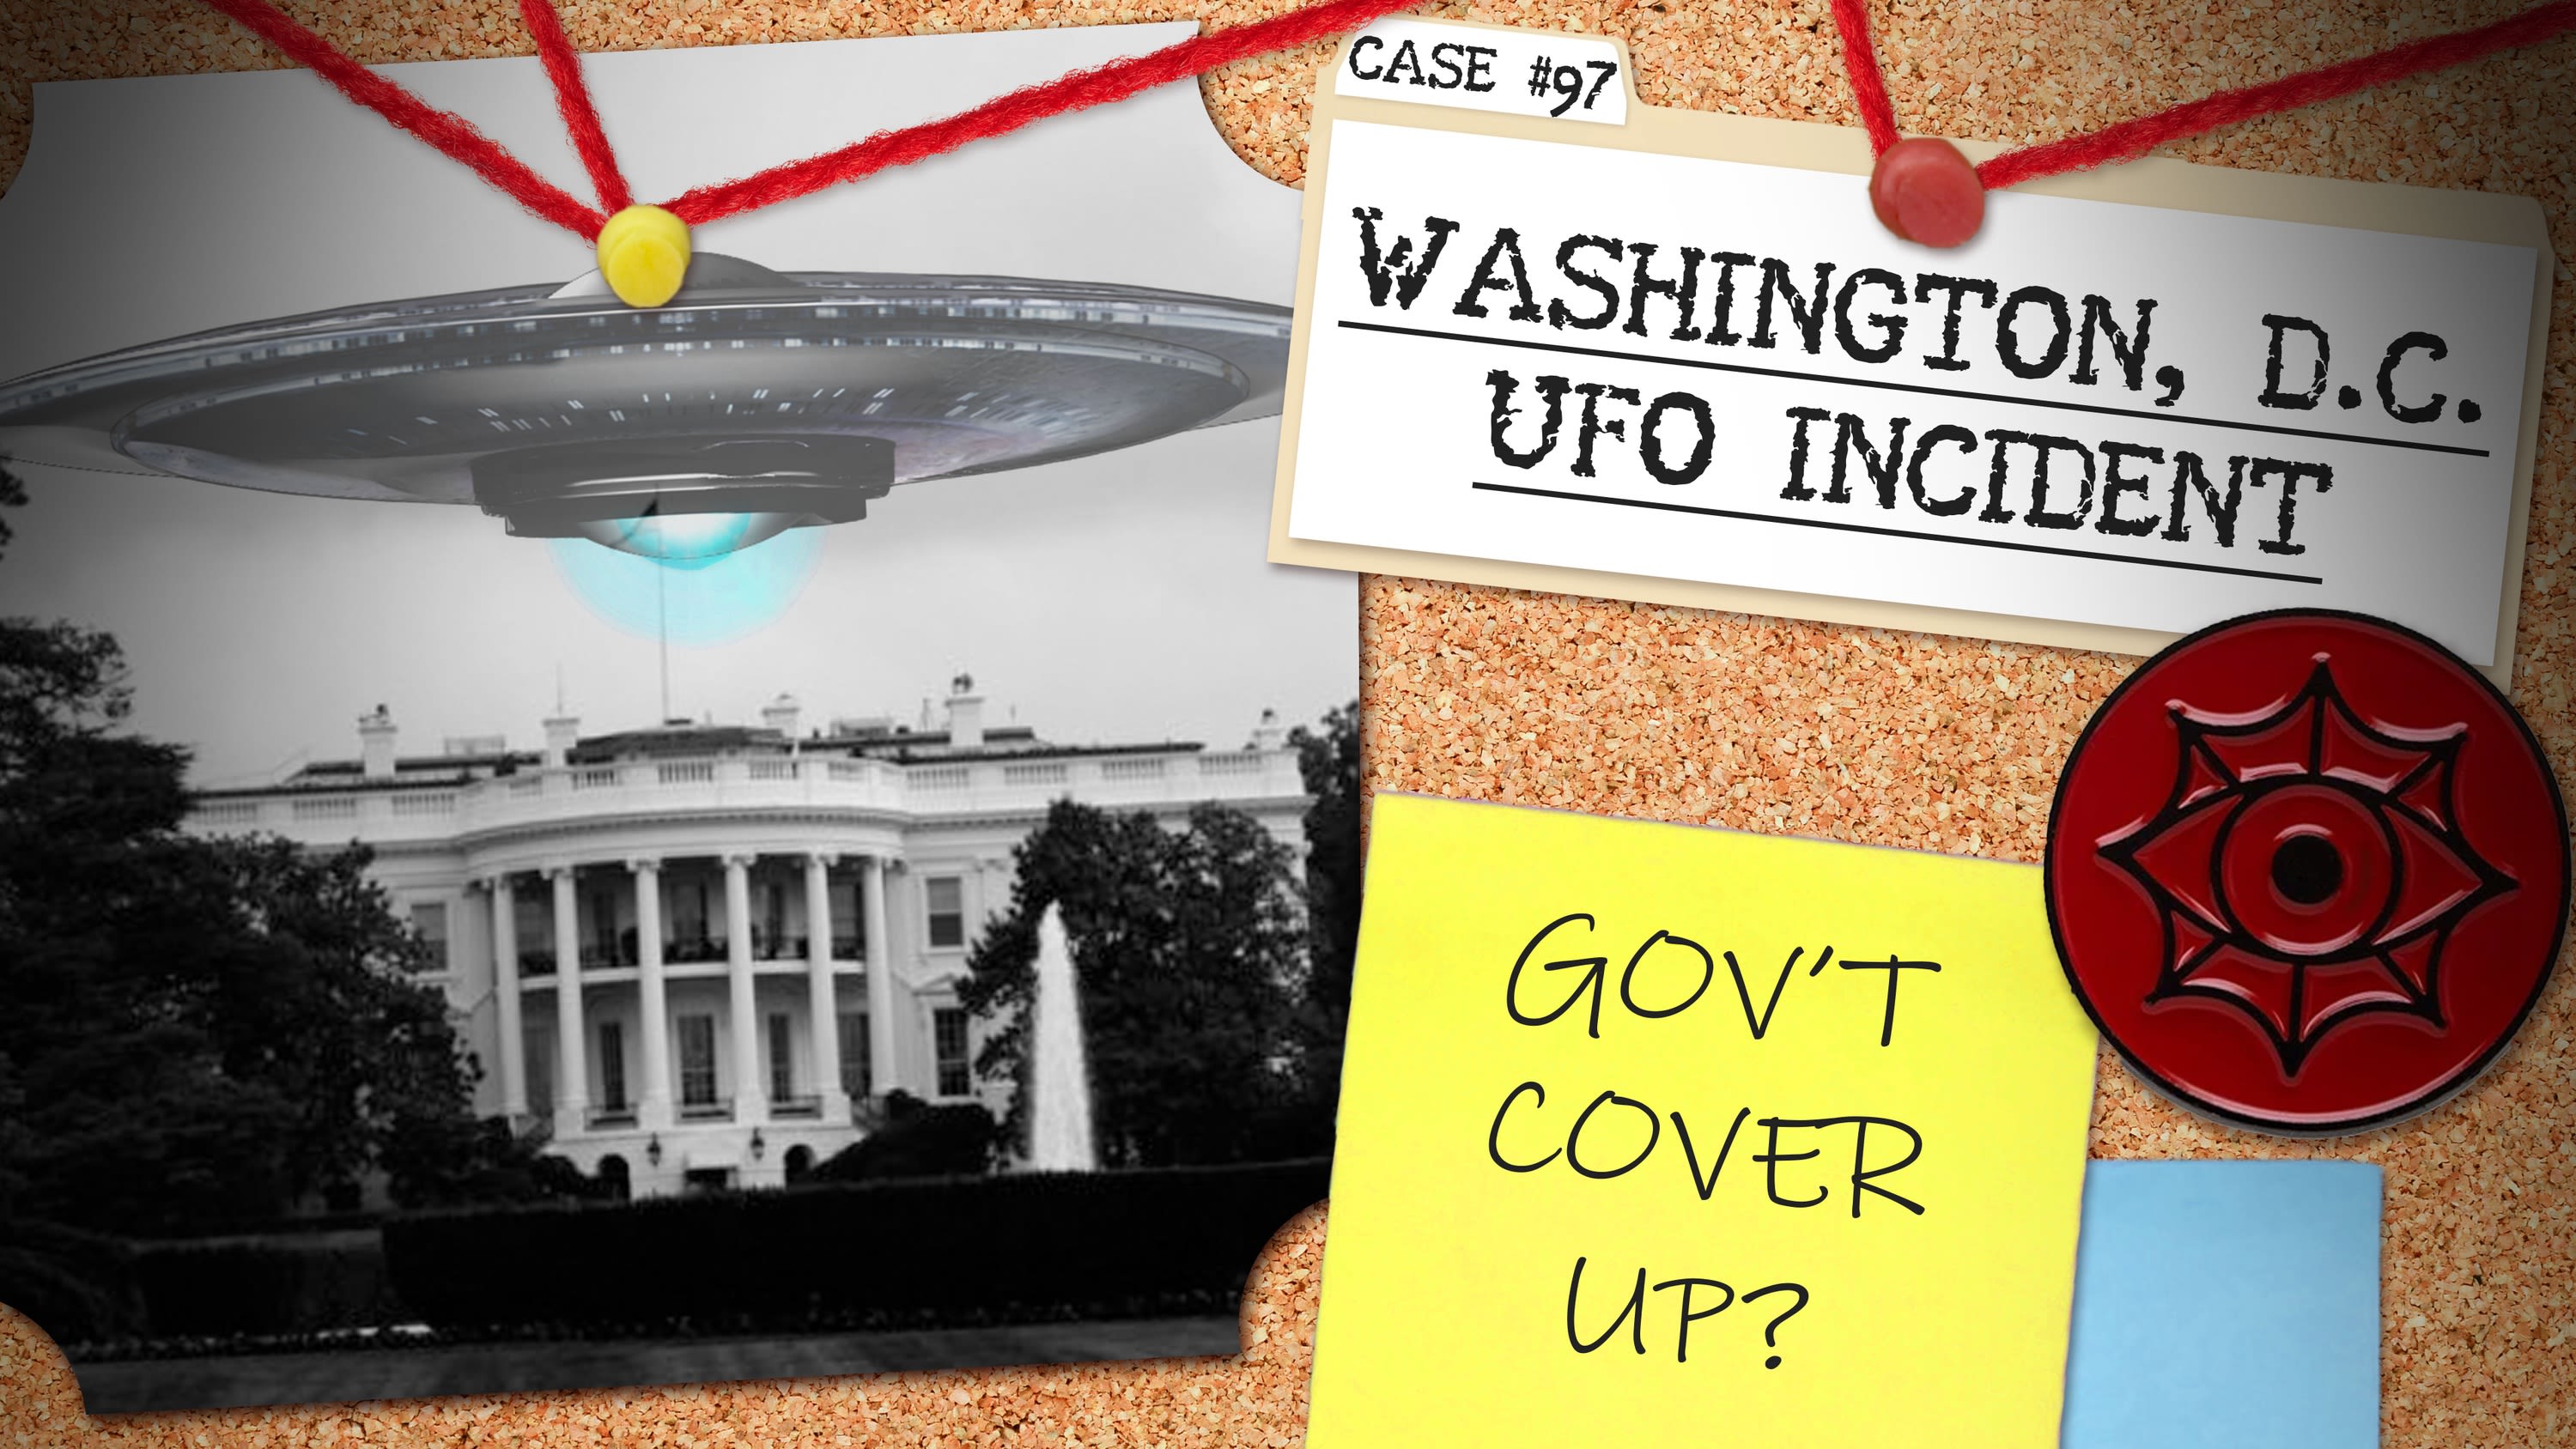 dyd uld træ Did Aliens Attempt to Visit the White House? | 1952 Washington, D.C. UFO  Incident - Rooster Teeth